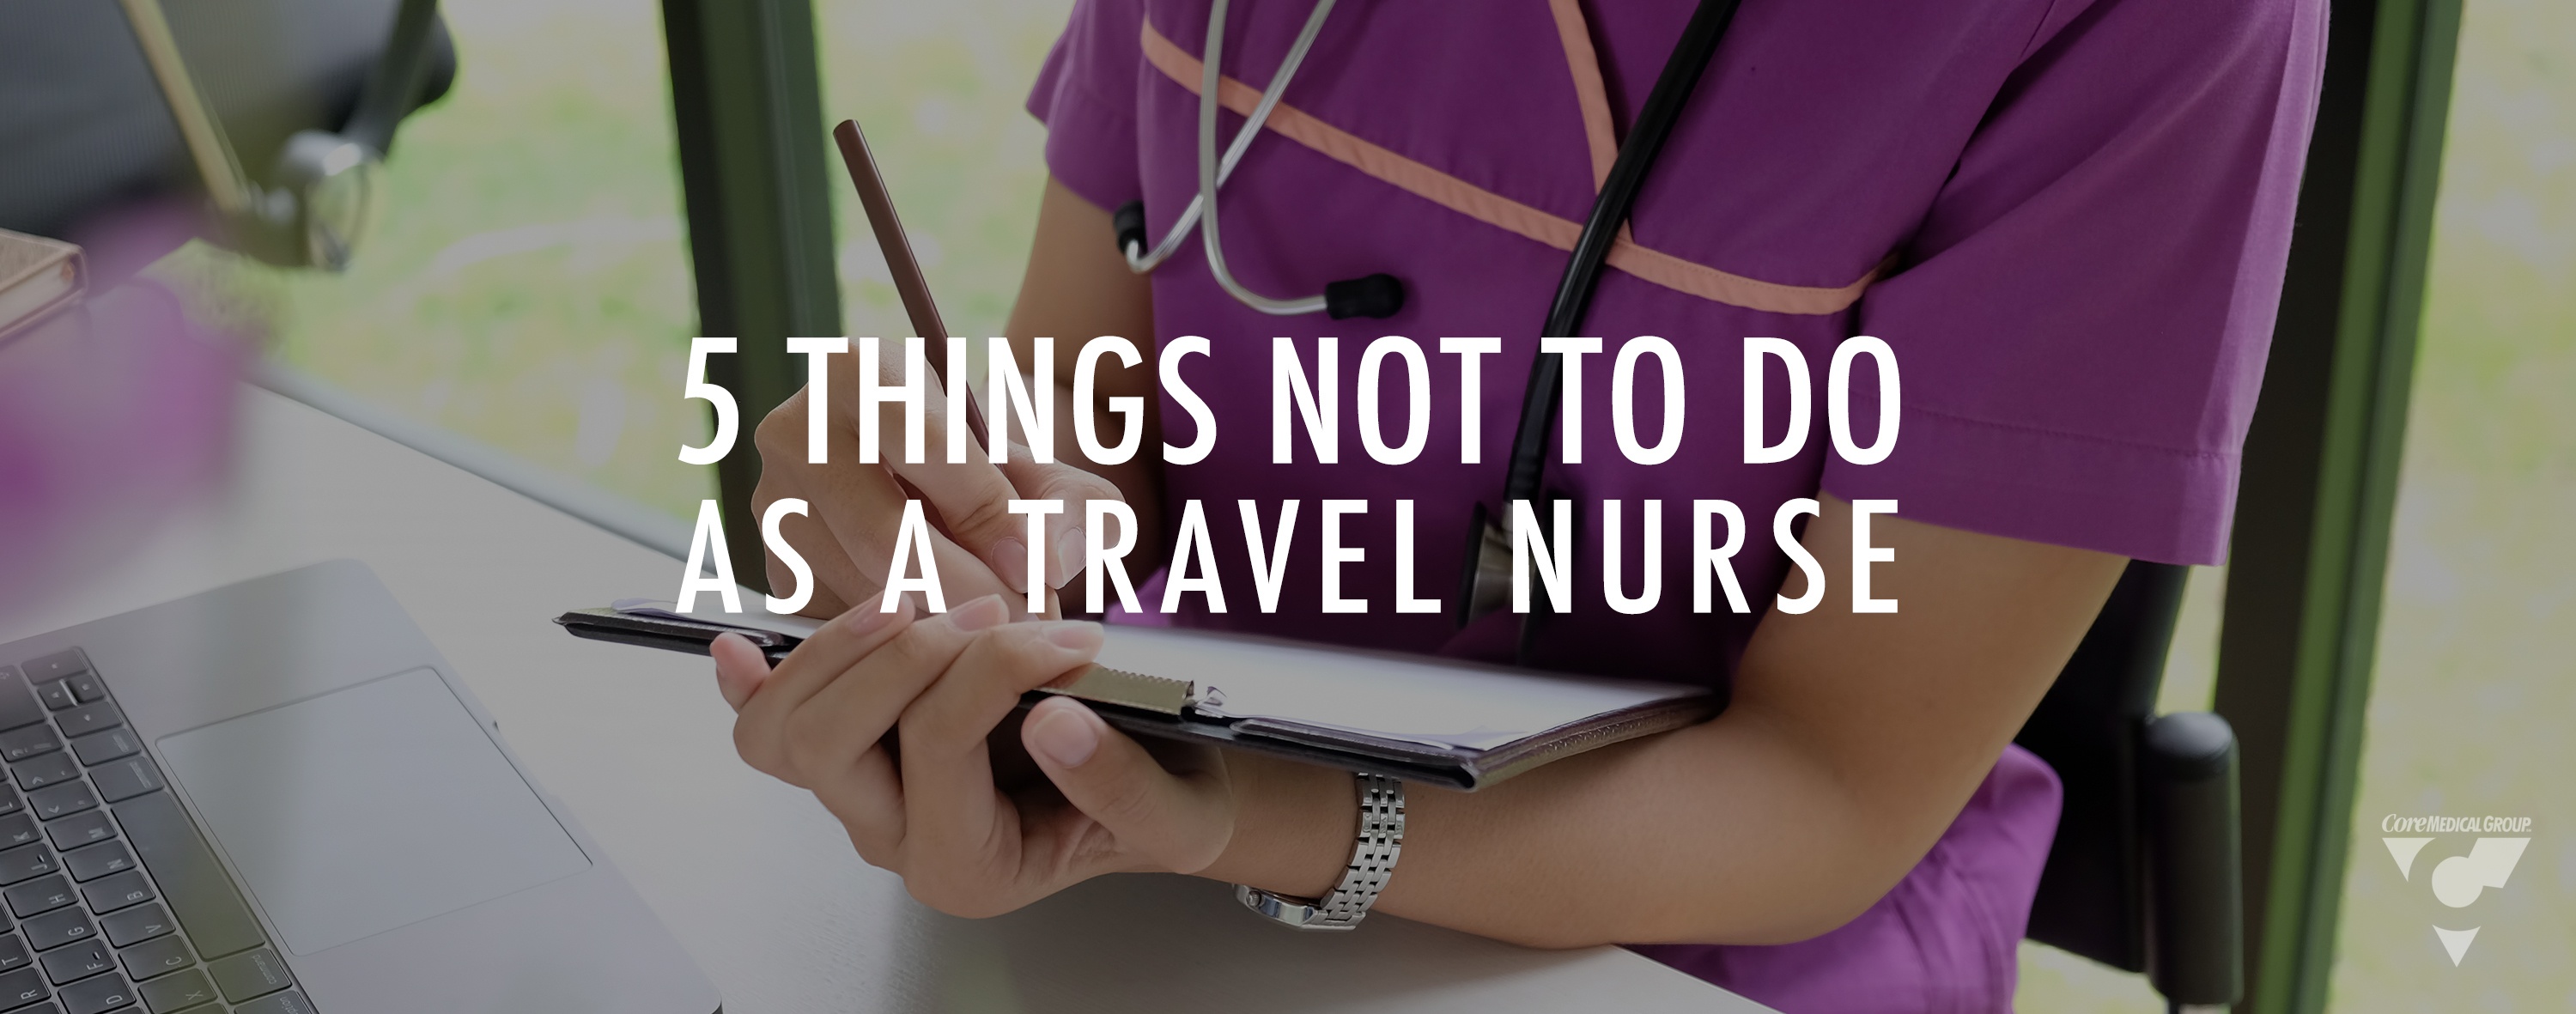 Core Medical Group Five Things Not to Do as a Travel Nurse